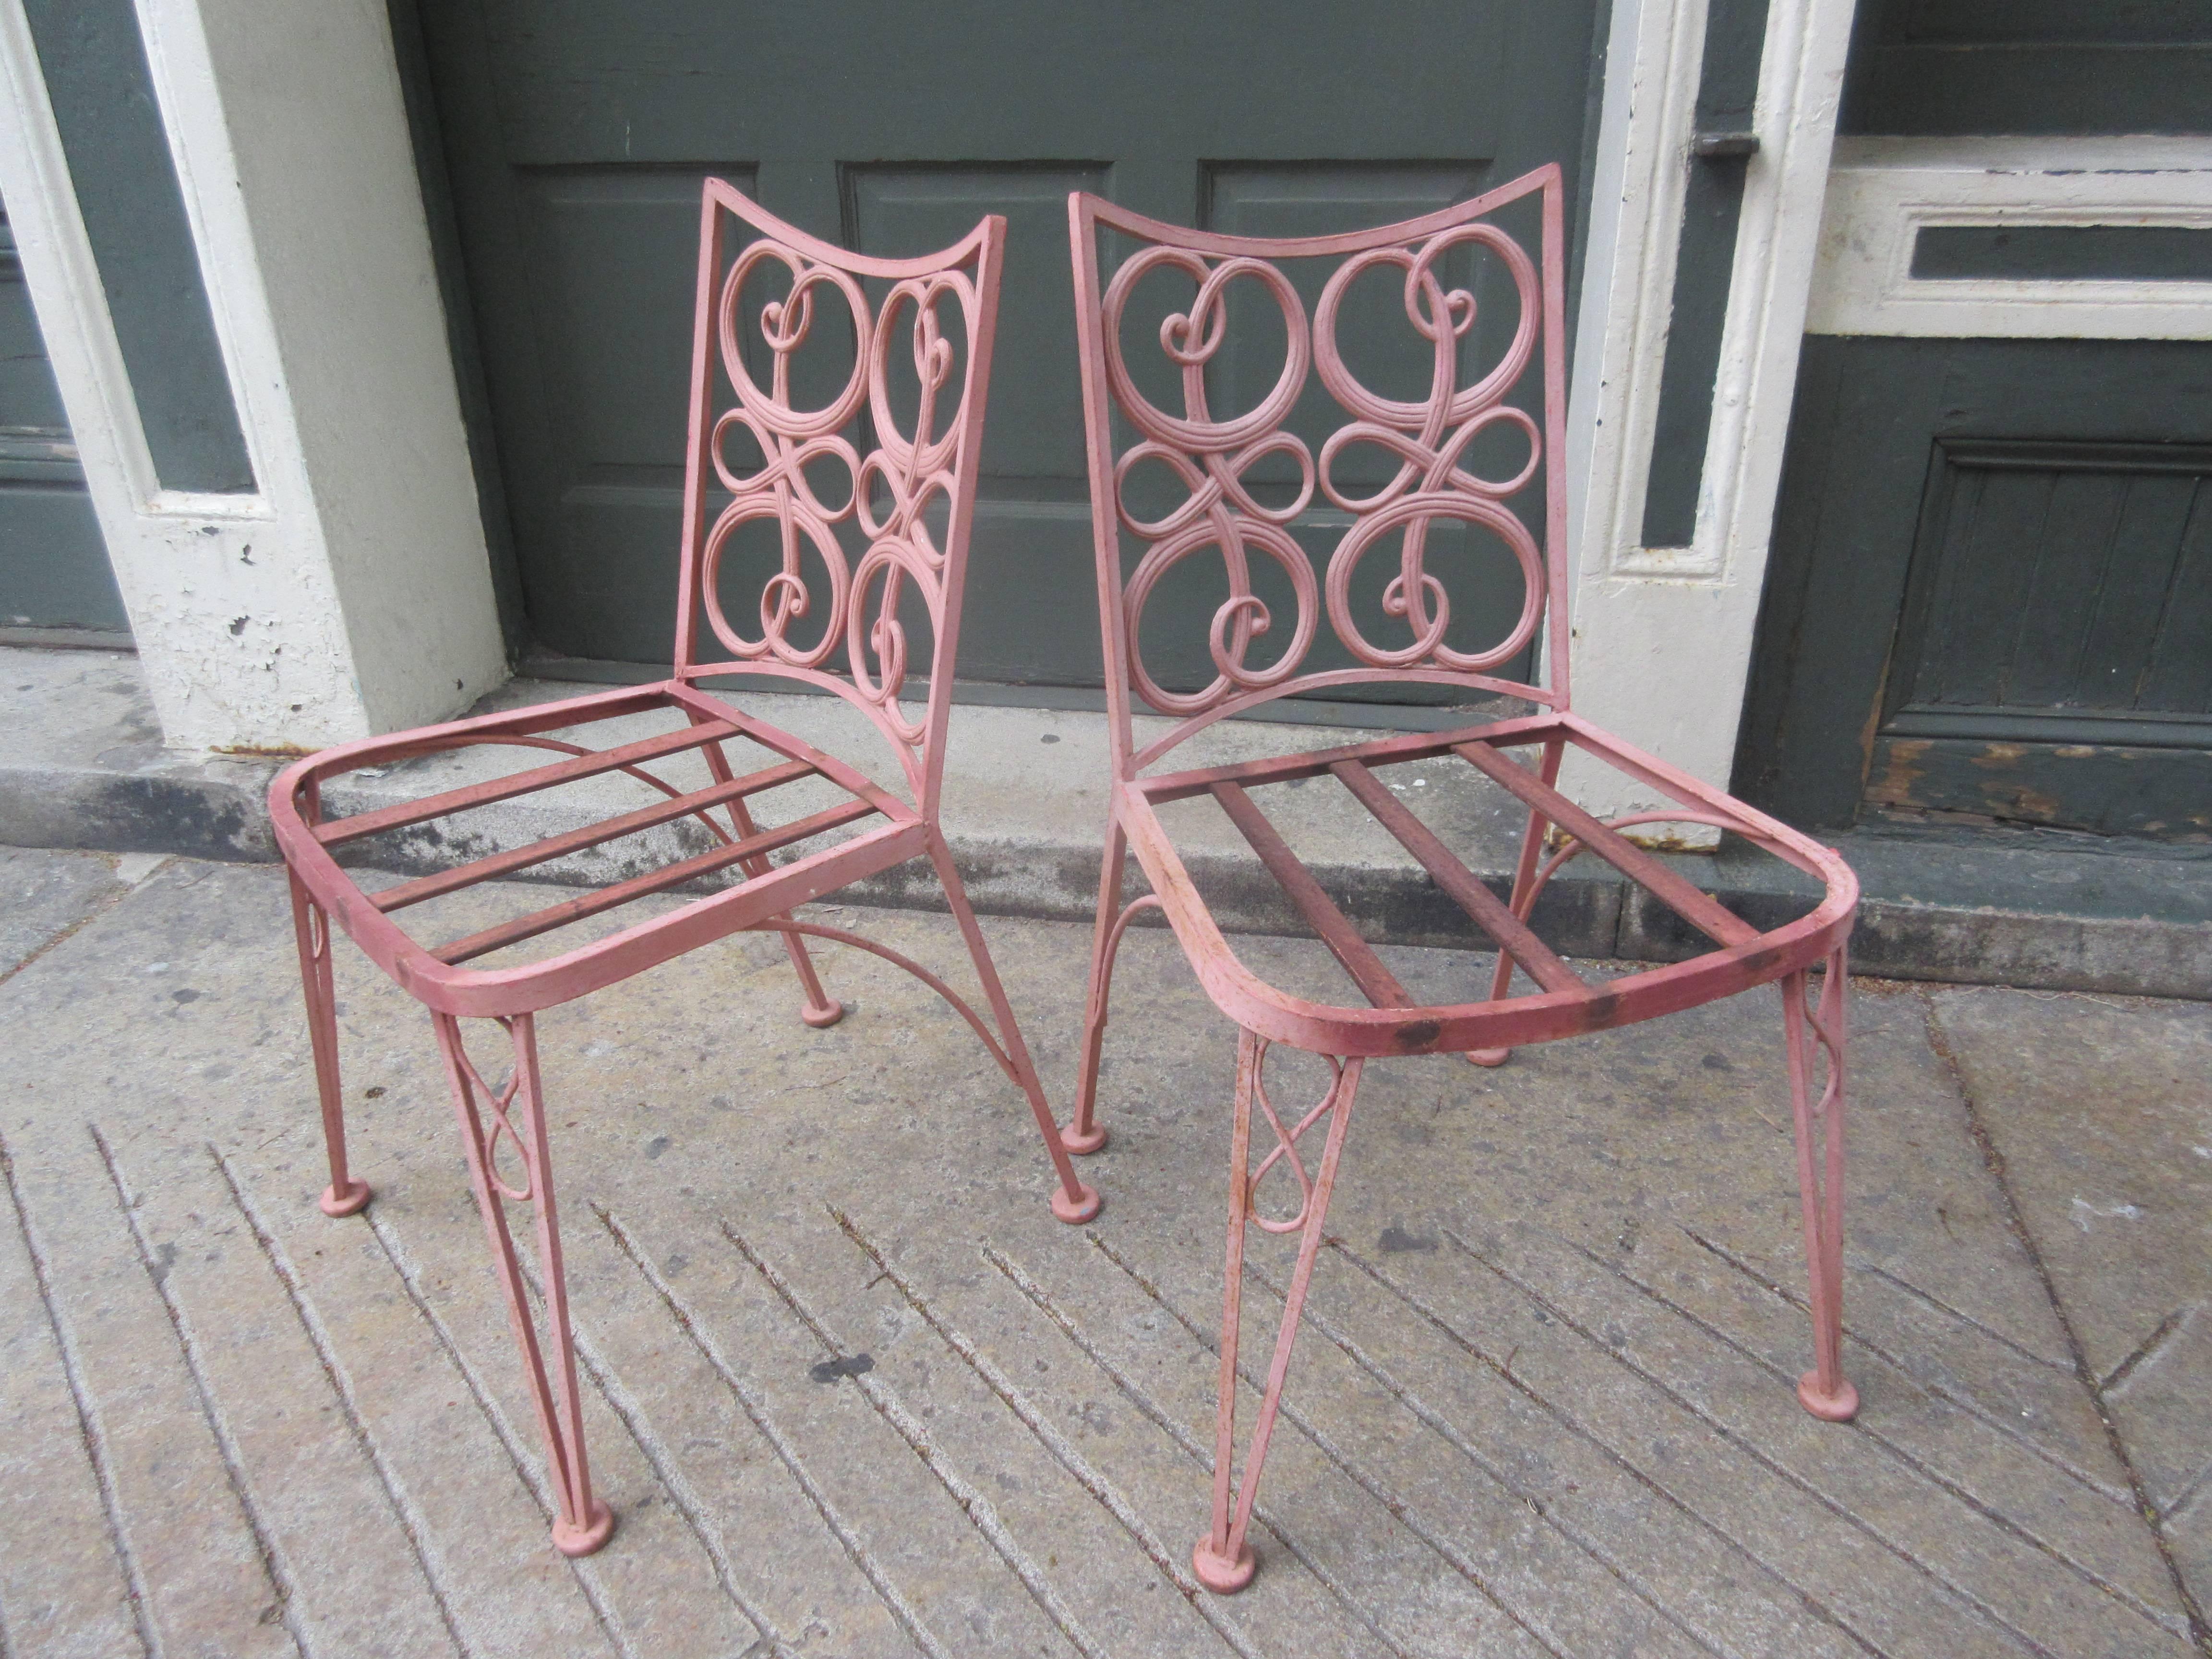 1950s or early 1960s cast metal patio set. Table base and chair backs are made up of interlocking loops. Set retains old, possibly original pink paint! Set looks good with the current patina or inquire about having the set powder coated in any color